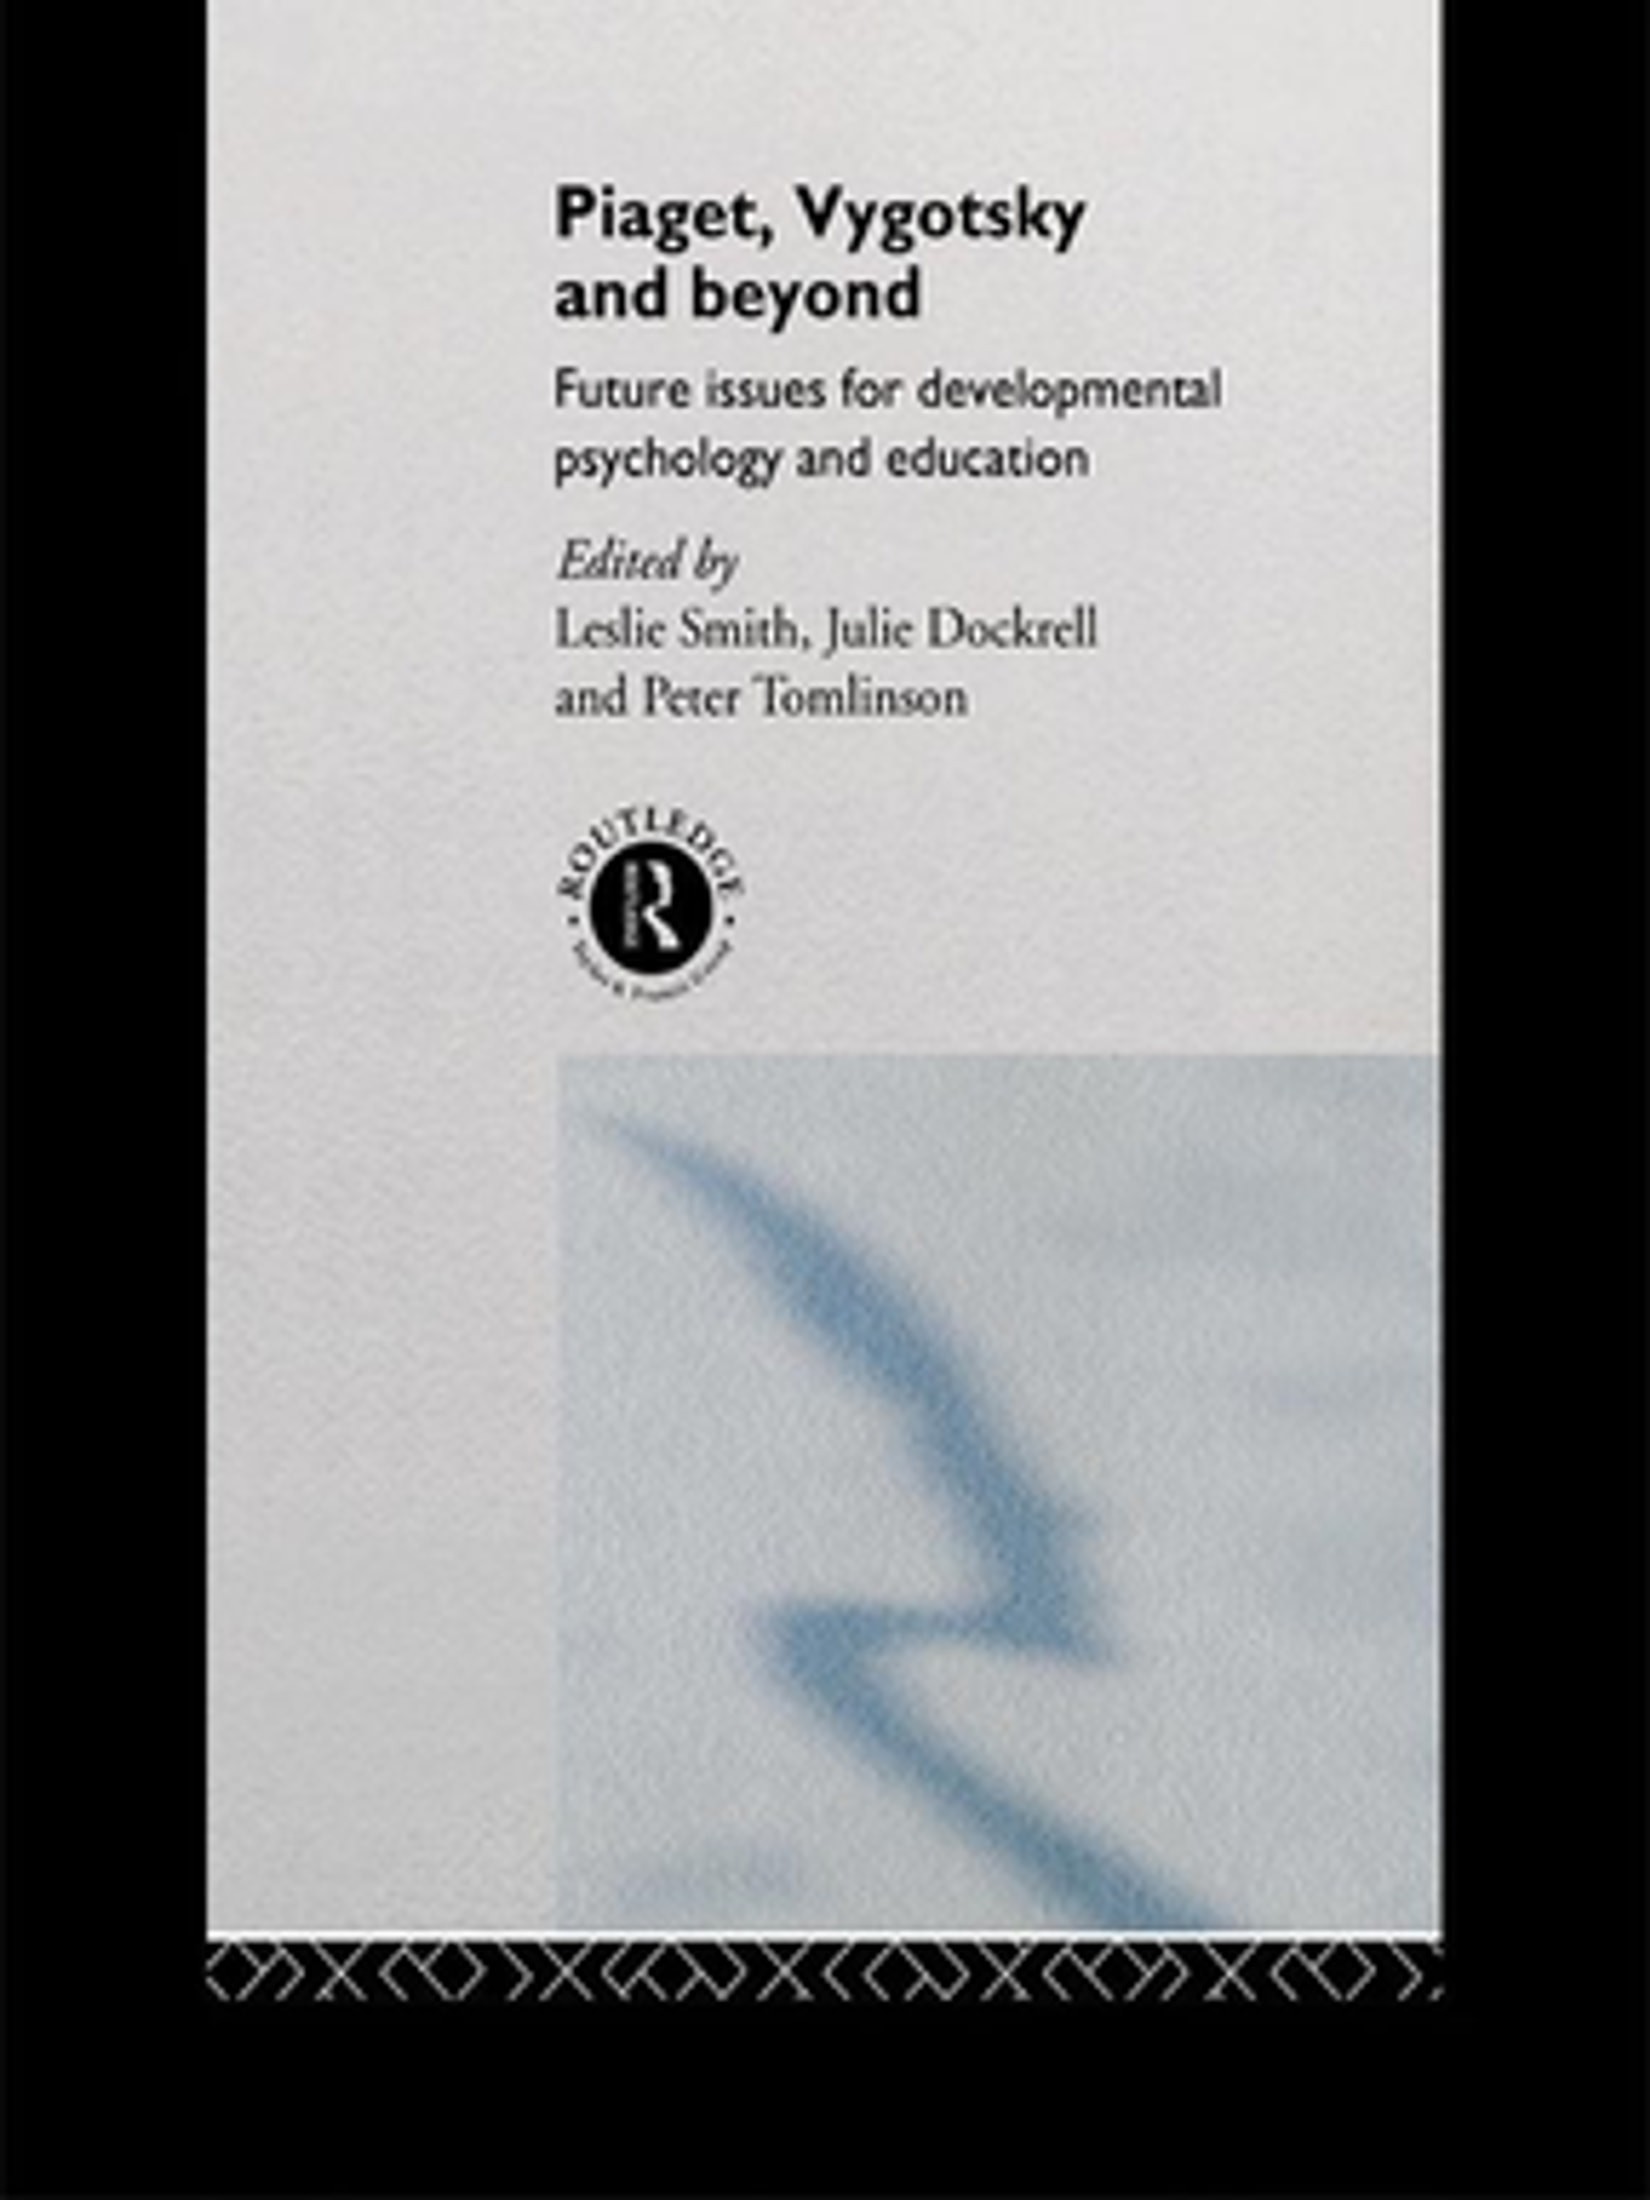 Piaget, Vygotsky and Beyond: Future Issues for Developmental Psychology and Education